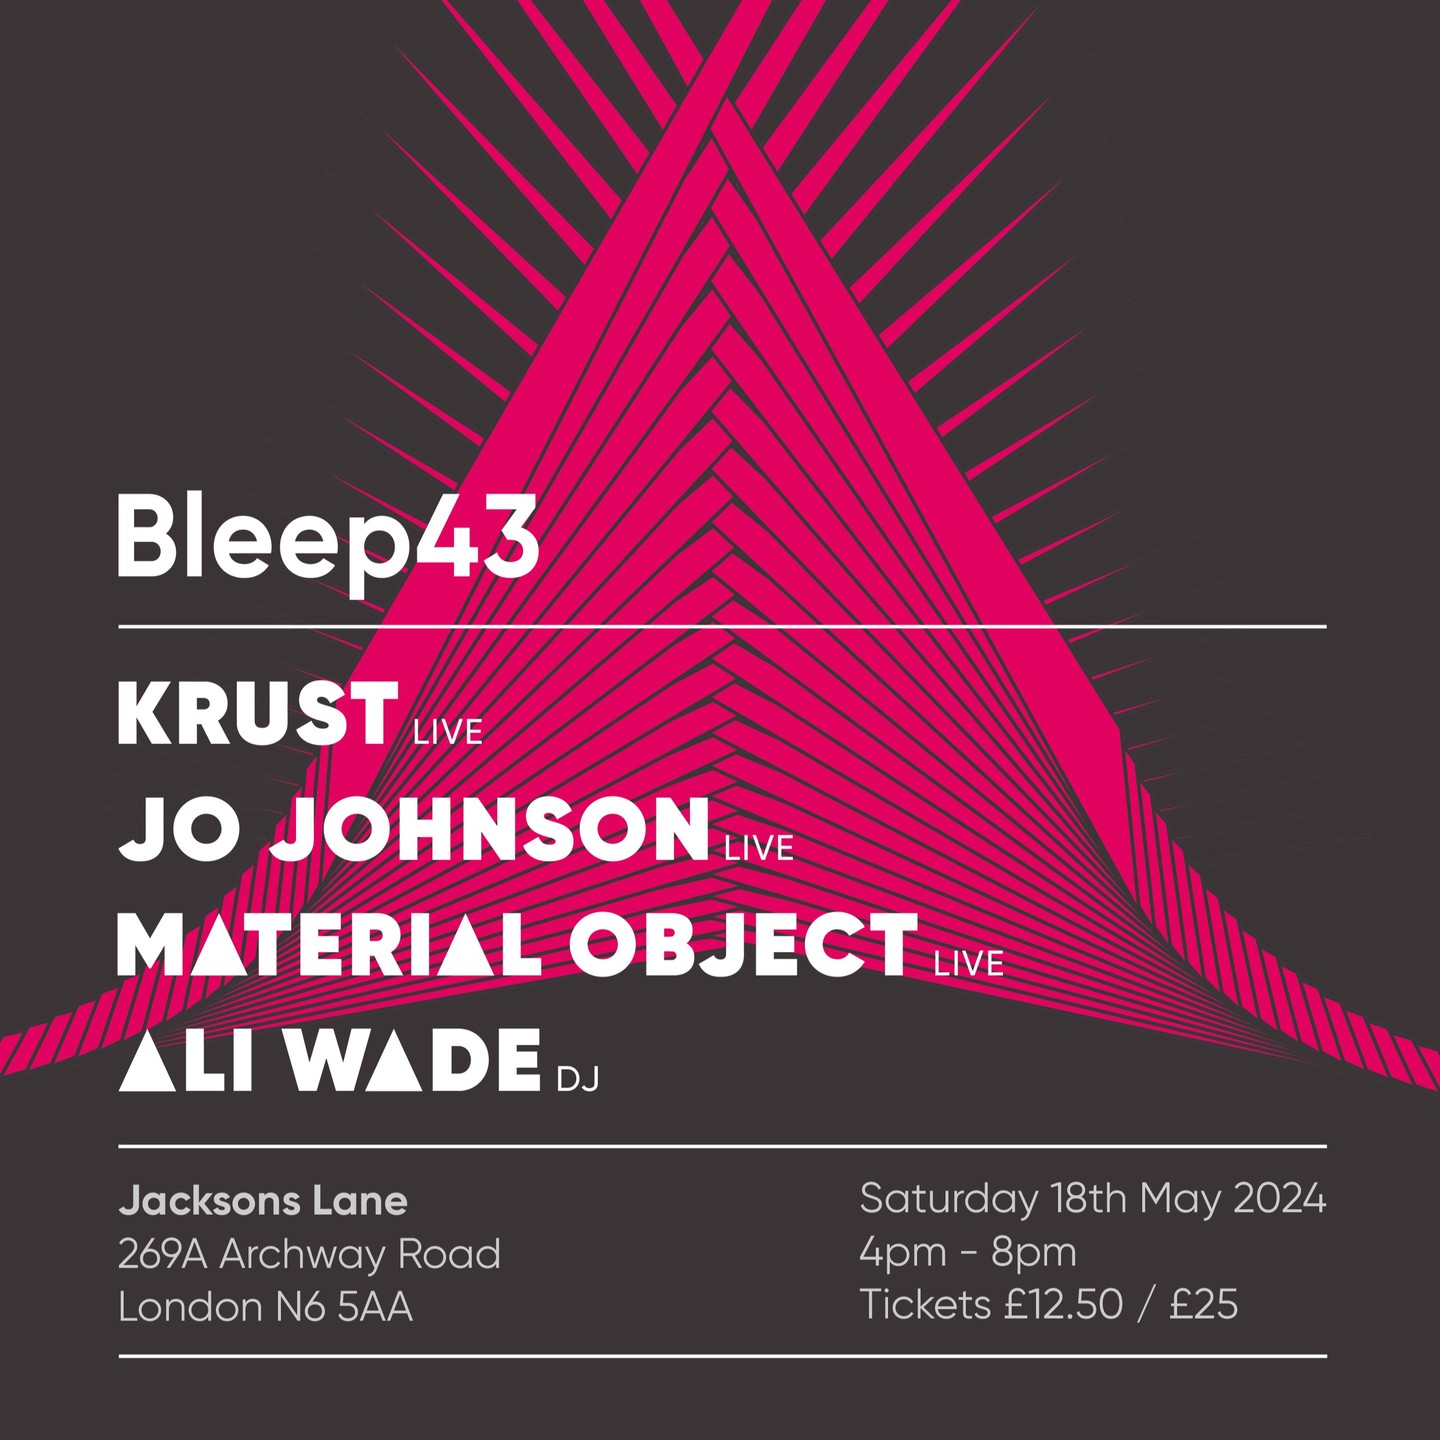 Tickets are on sale now for the next Bleep43 deep listening event at 4pm on the 18th May. We’re beyond excited to witnes